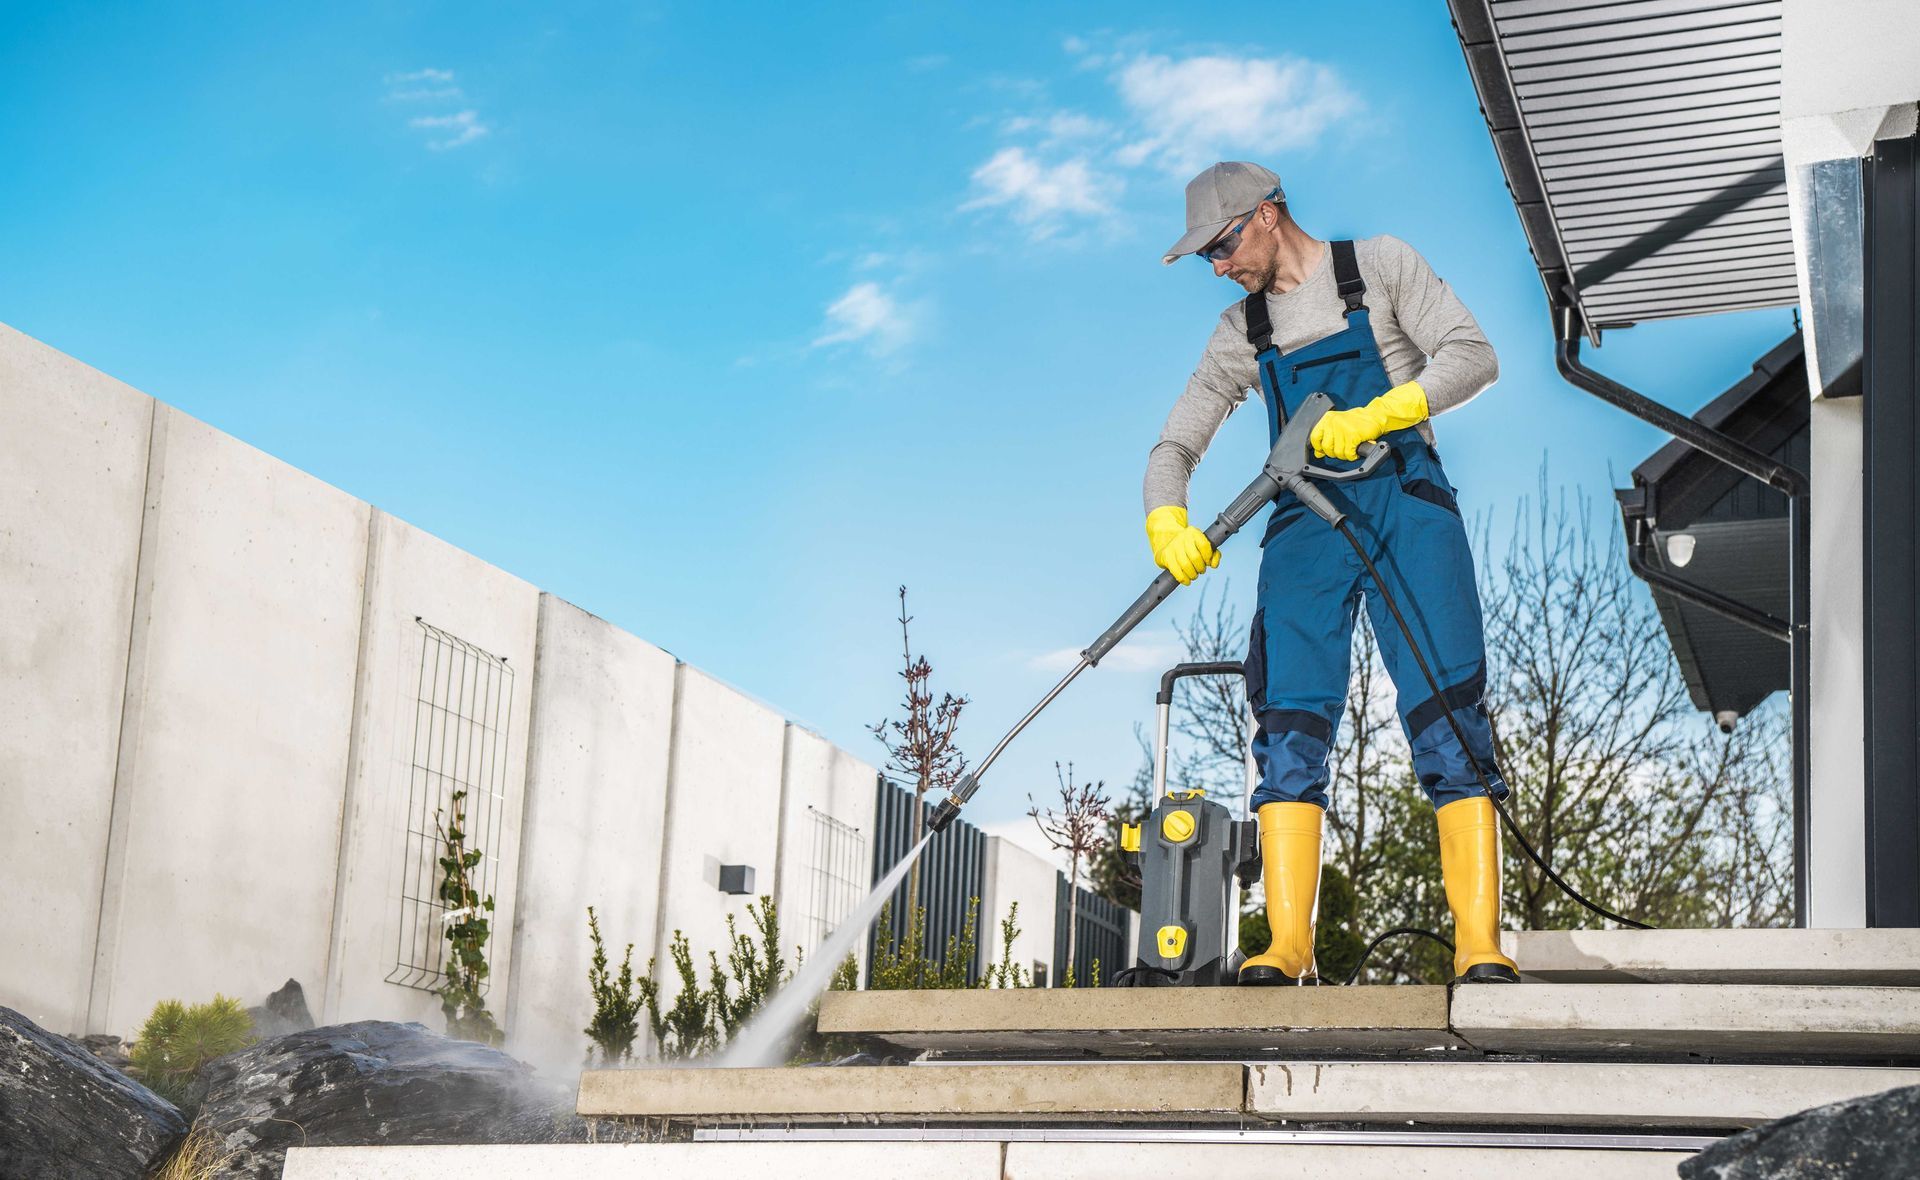 A man is using a high pressure washer to clean concrete steps